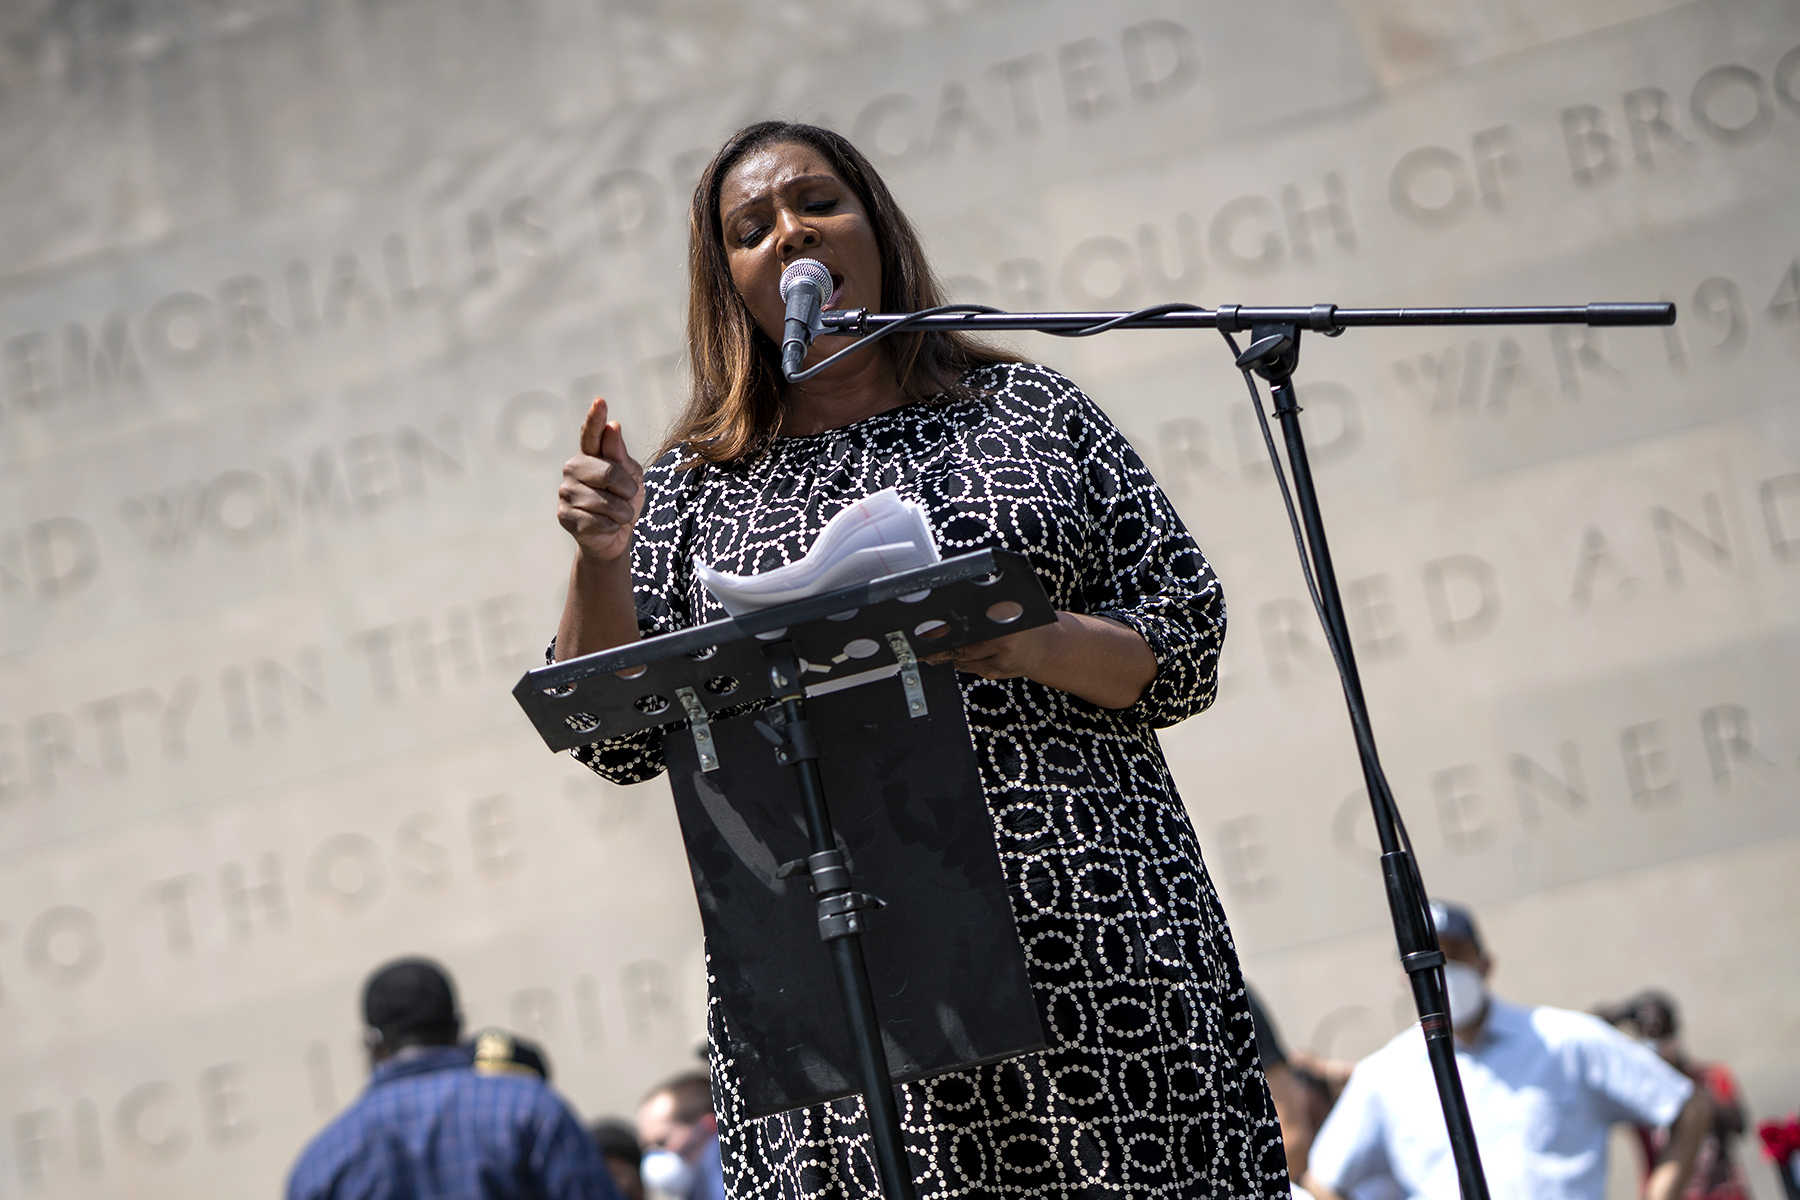 State Attorney General Letitia James